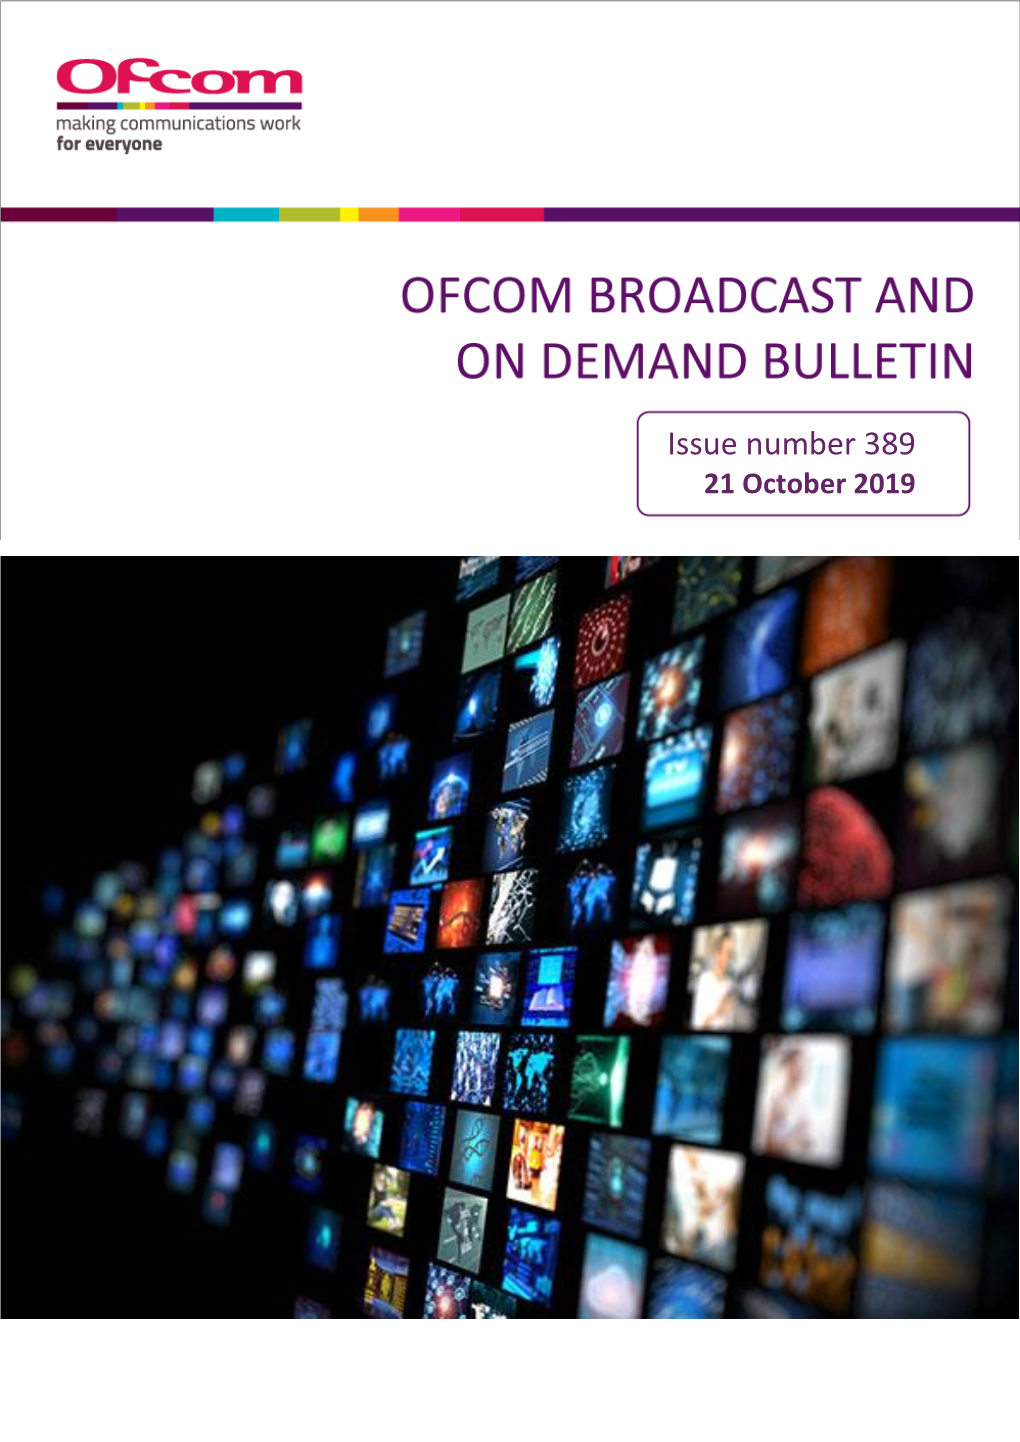 Issue Number 389 21 October 2019 Issue 389 of Ofcom’S Broadcast and on Demand Bulletin 21 October 2019